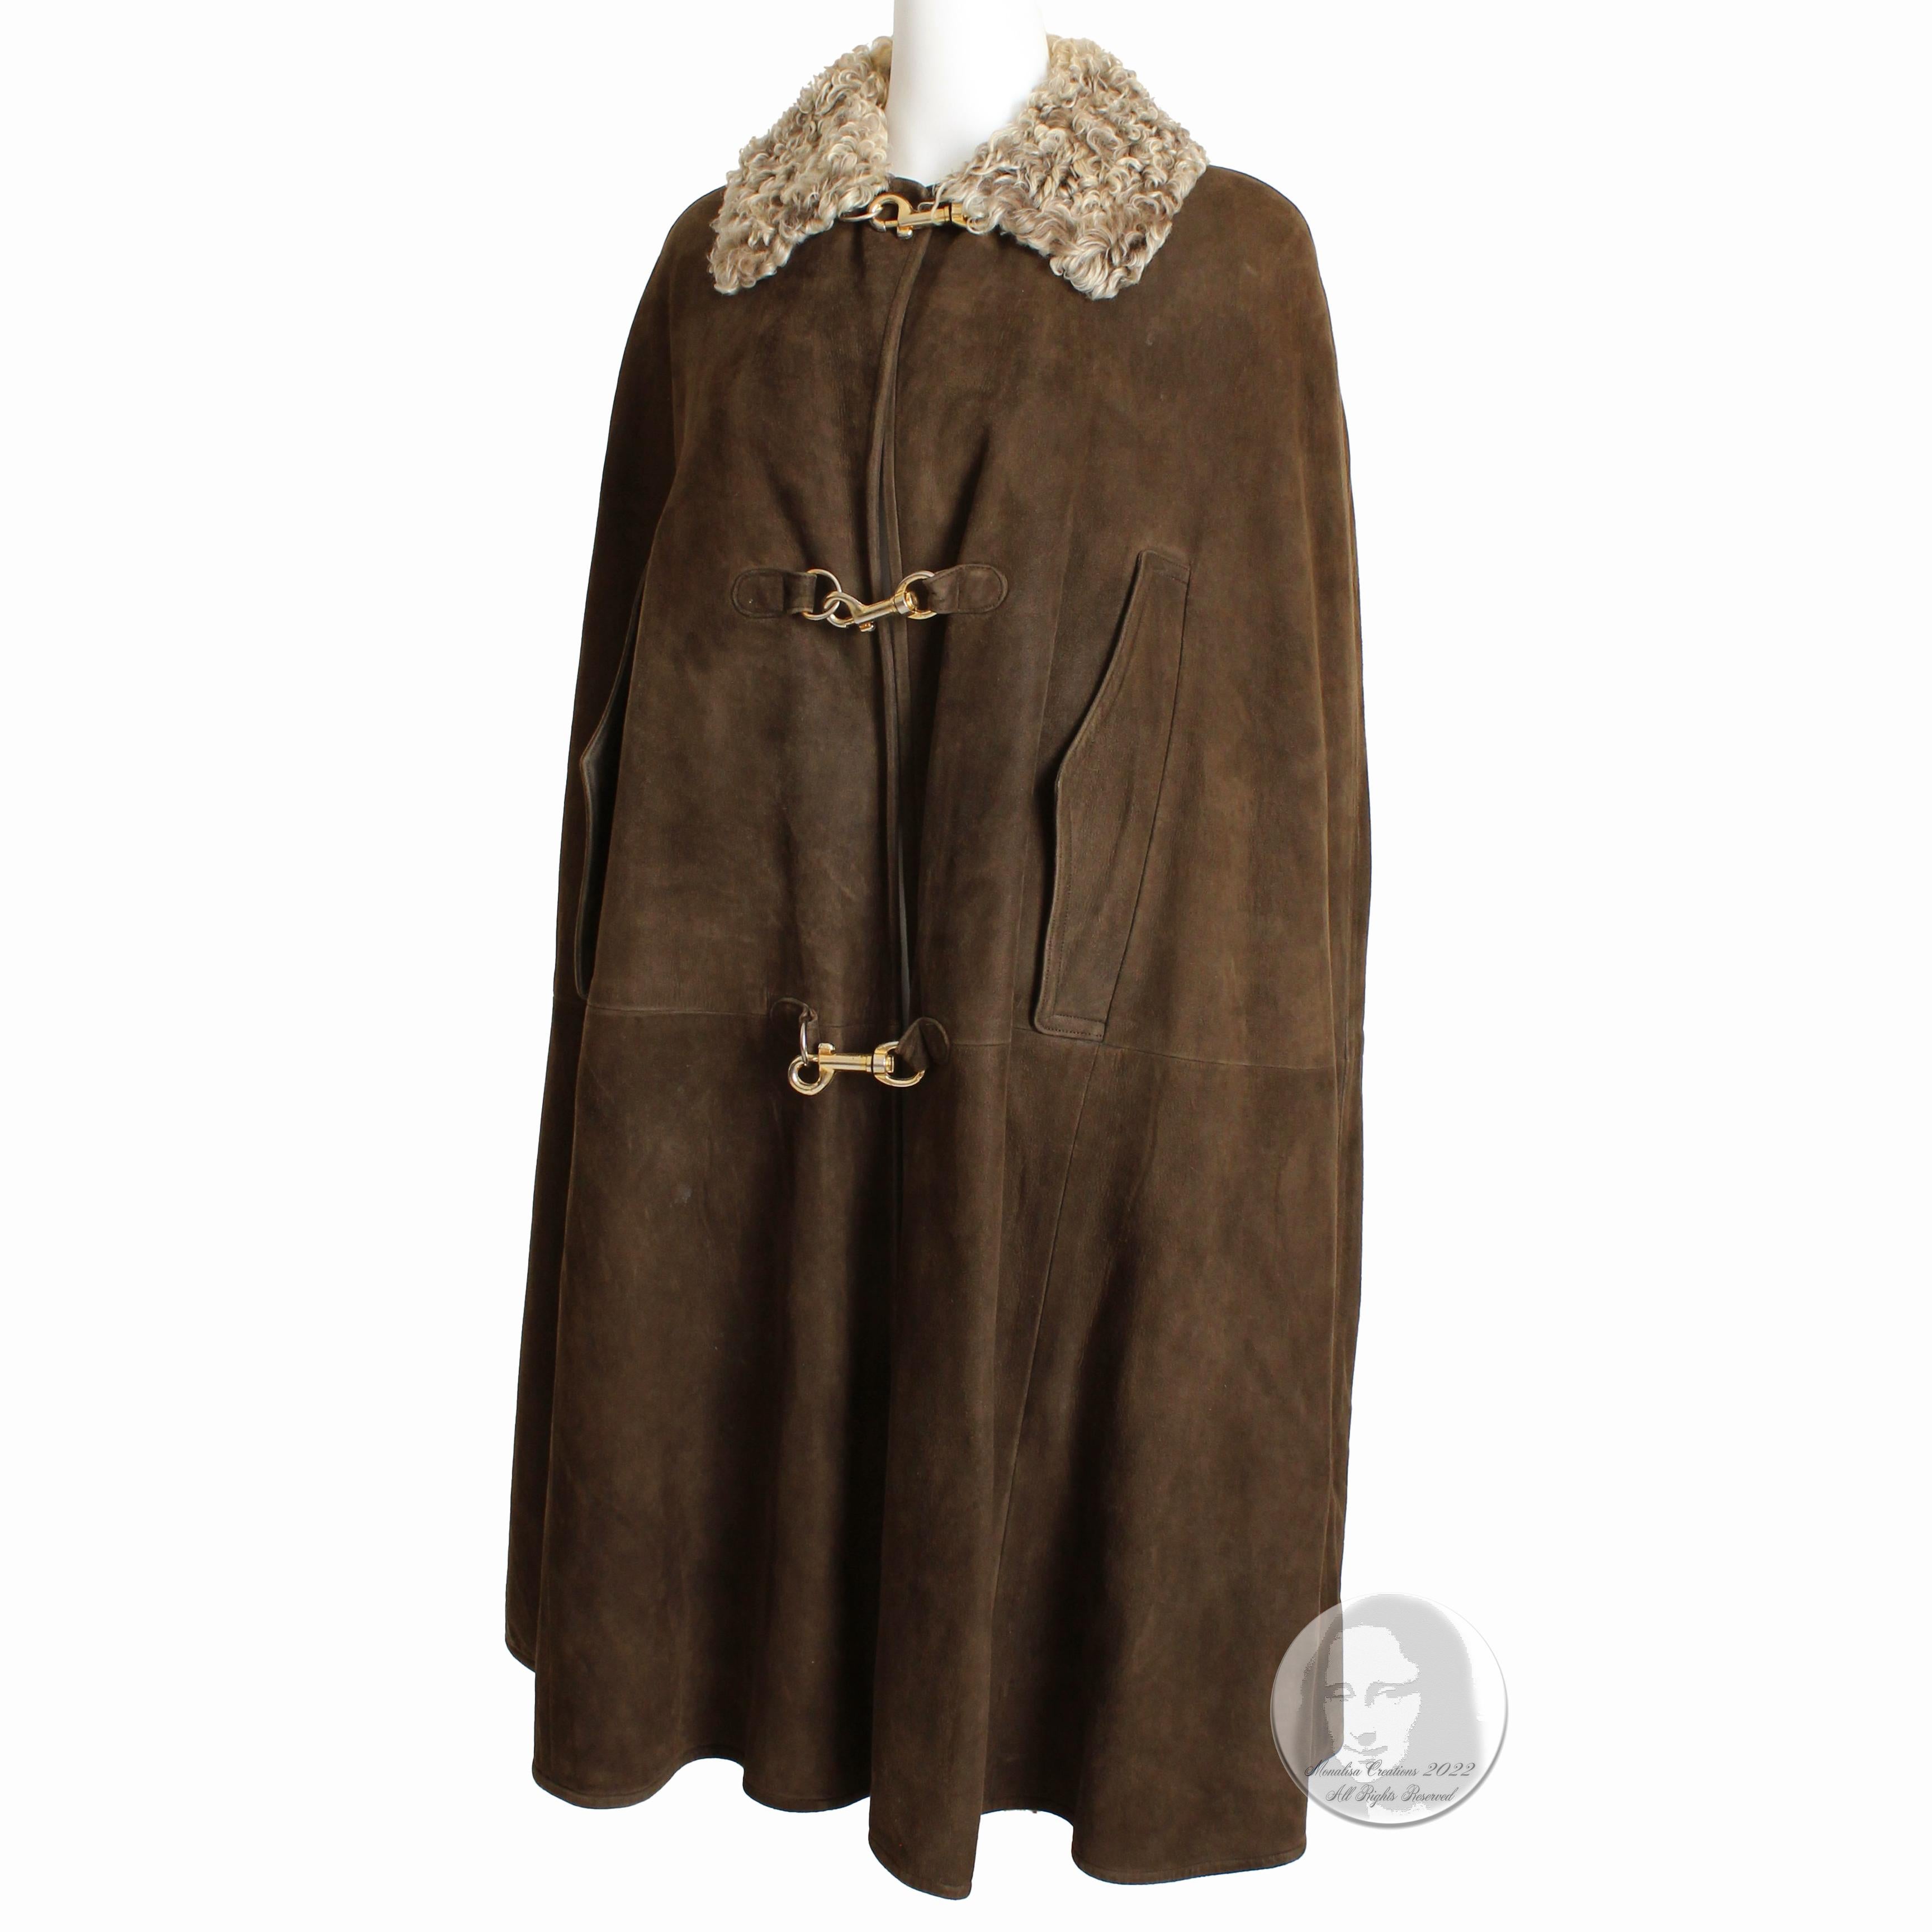 Bonnie Cashin for Sills Cape Brown Suede with Curly Lamb Collar 70s Vintage OSFM 1